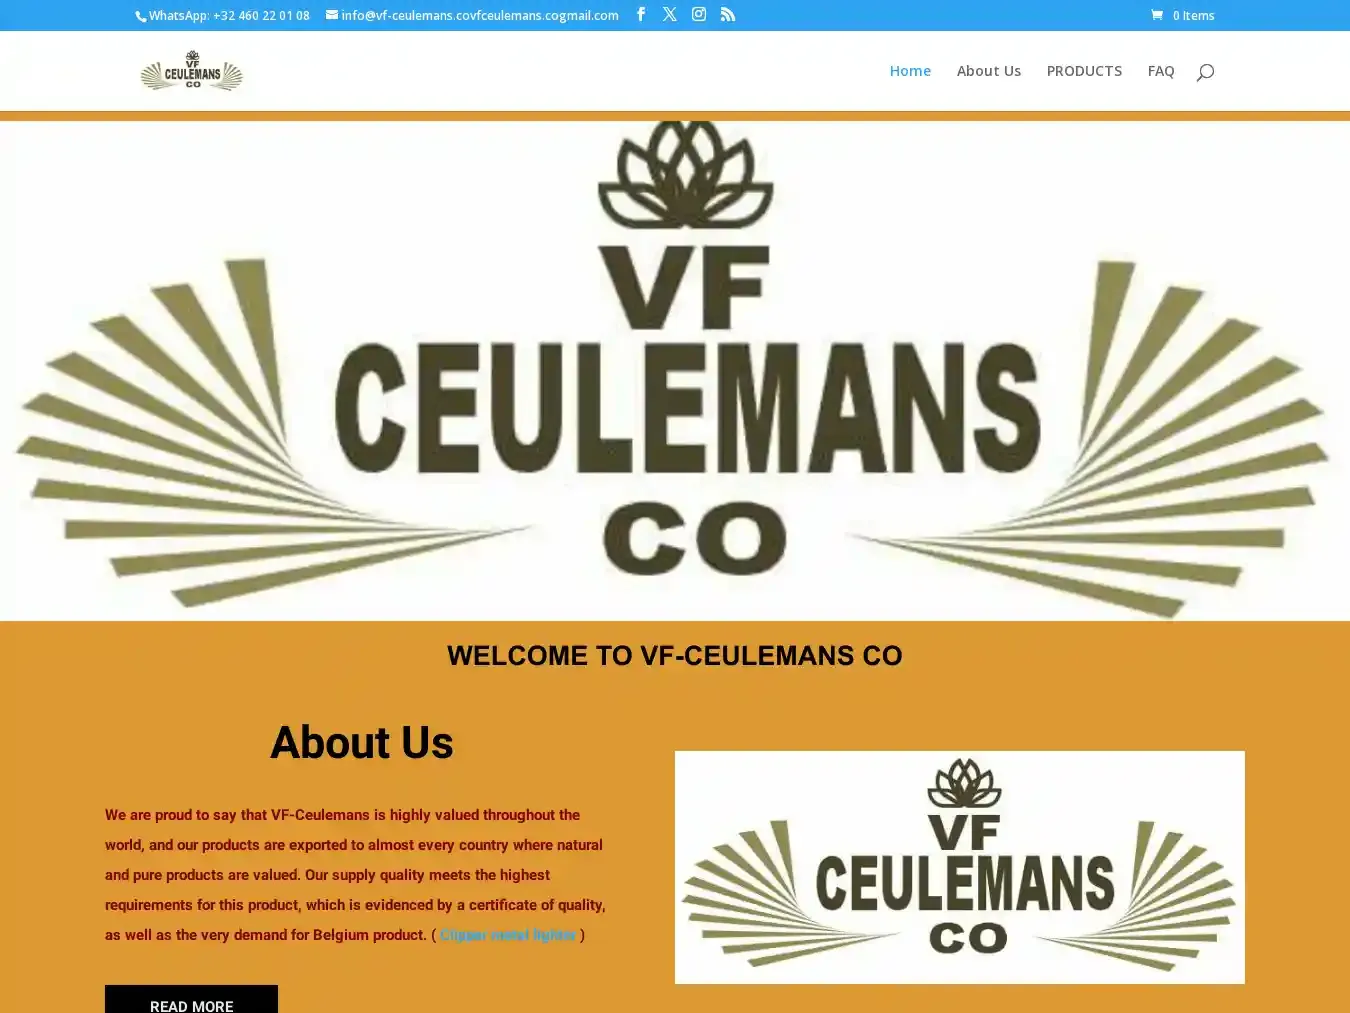 Vf-ceulemans.co Fraudulent Non-Delivery website.